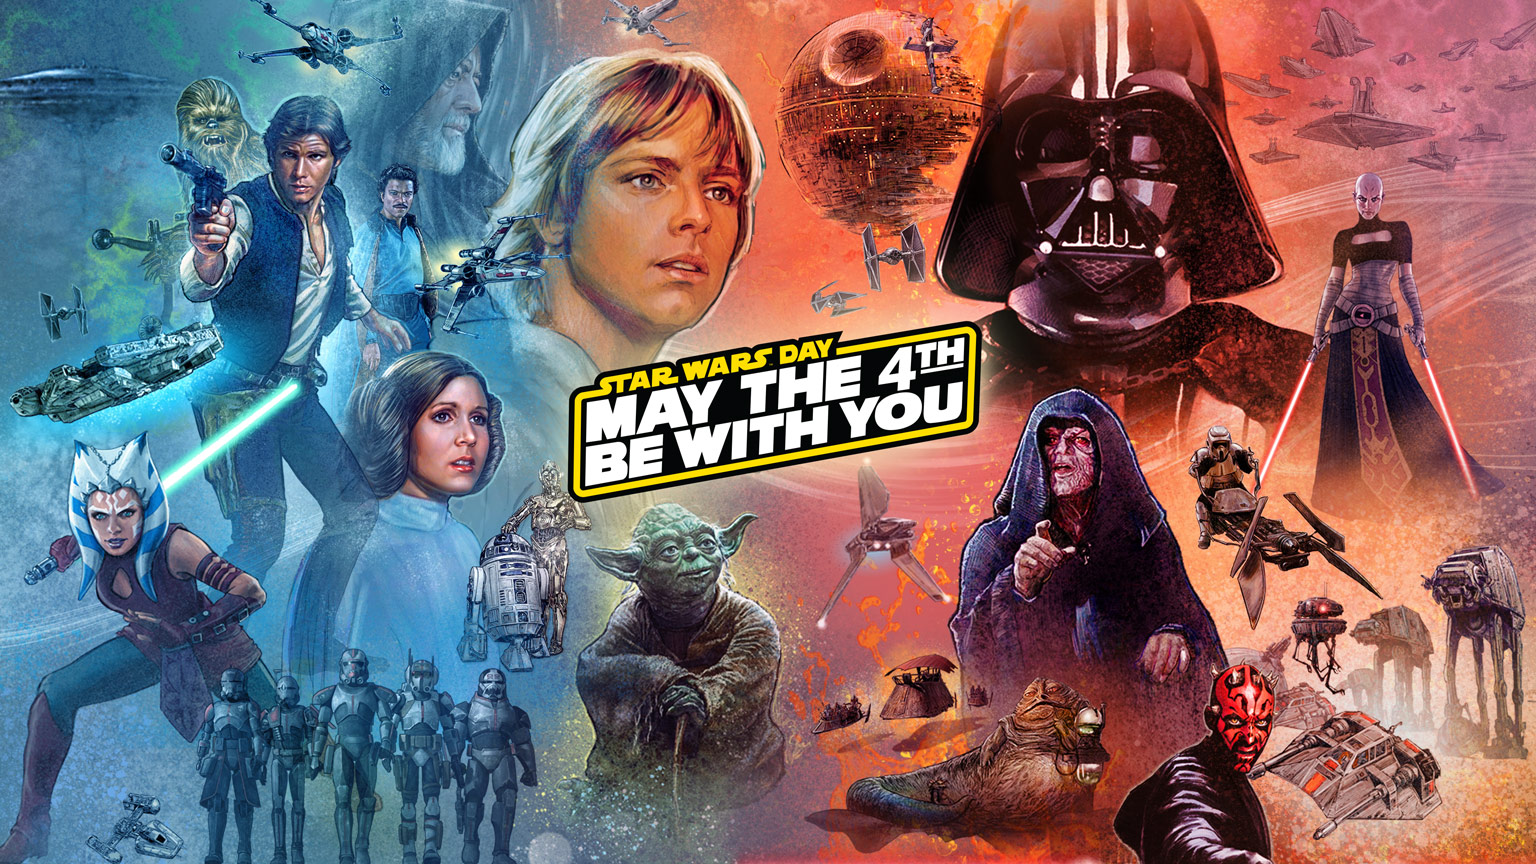 "May the force be with you": 4 de mayo Día de Star Wars